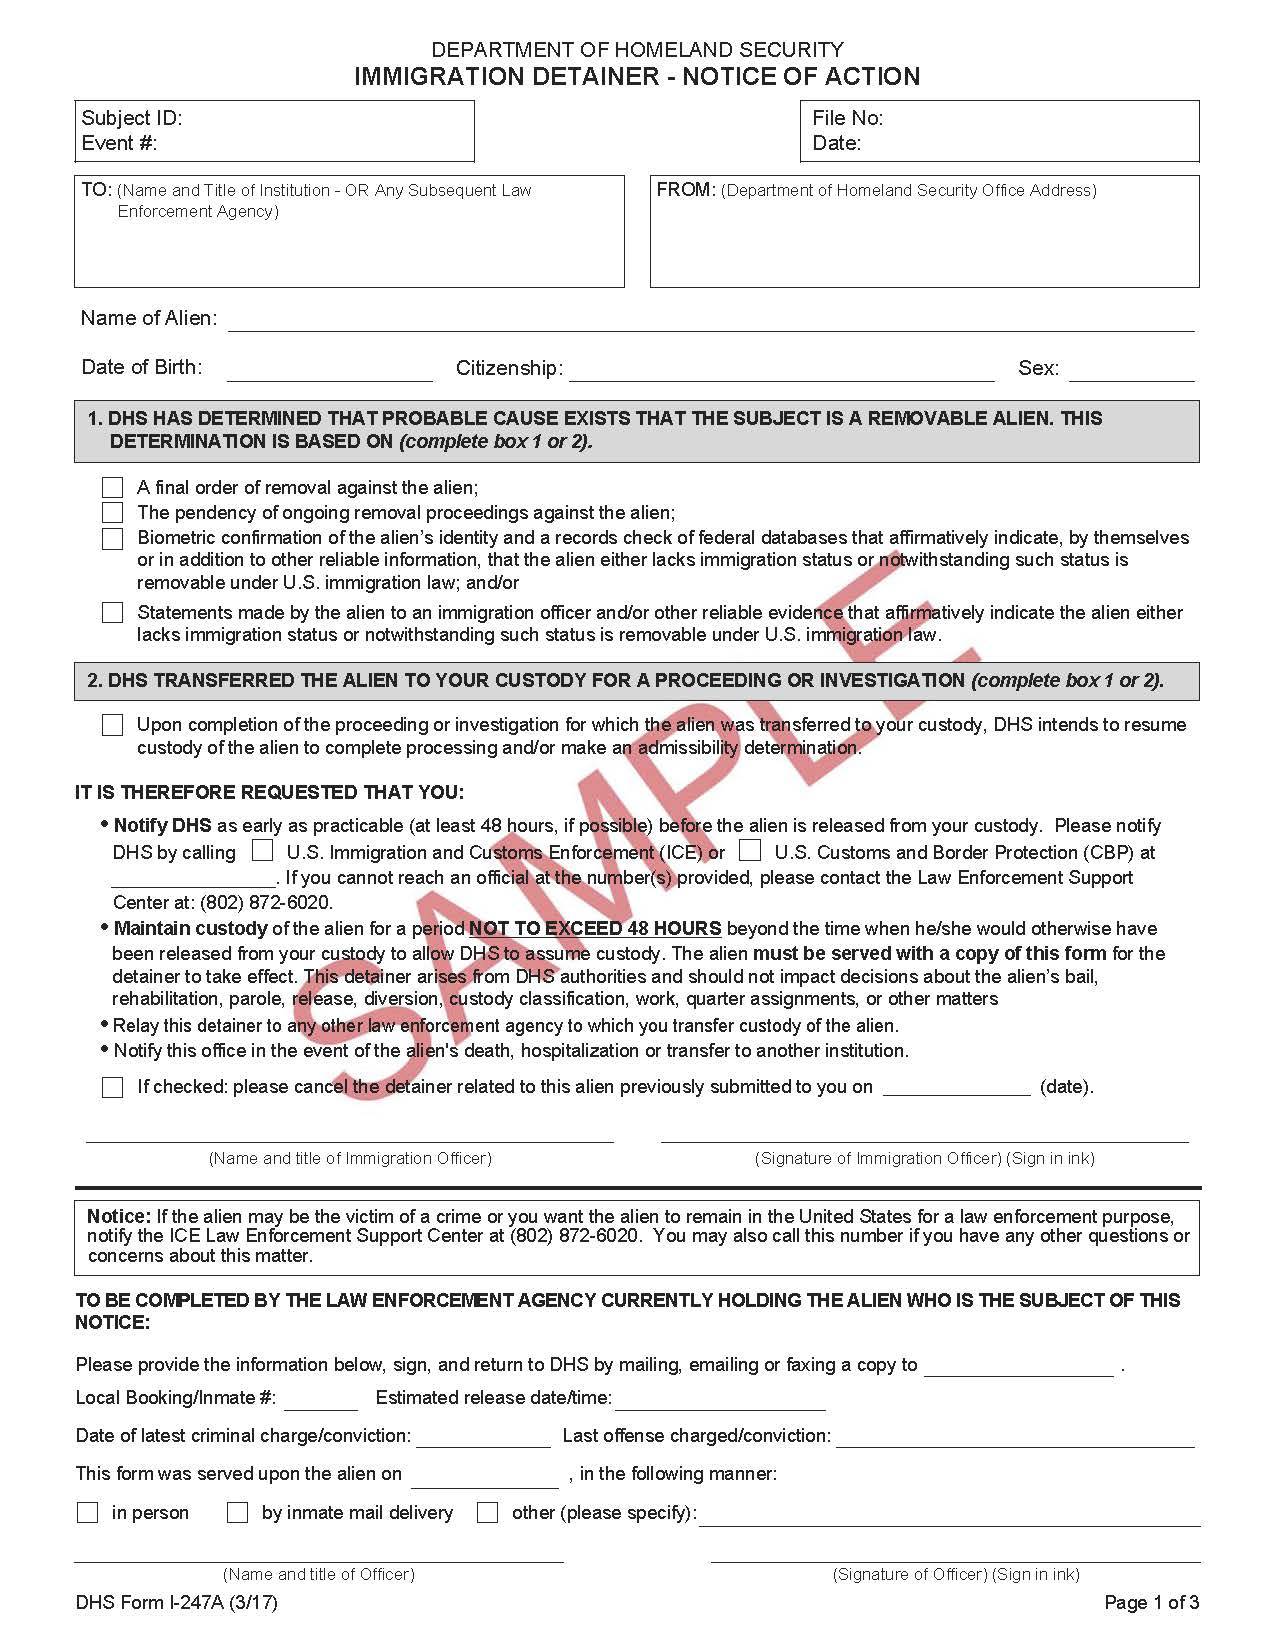 Contributed image/San Juan County Prosecutor’s Office                                The new ICE detainer form, which became effective on April 3, requires “probable cause…that the subject is a removable alien,” not probable cause of a crime.